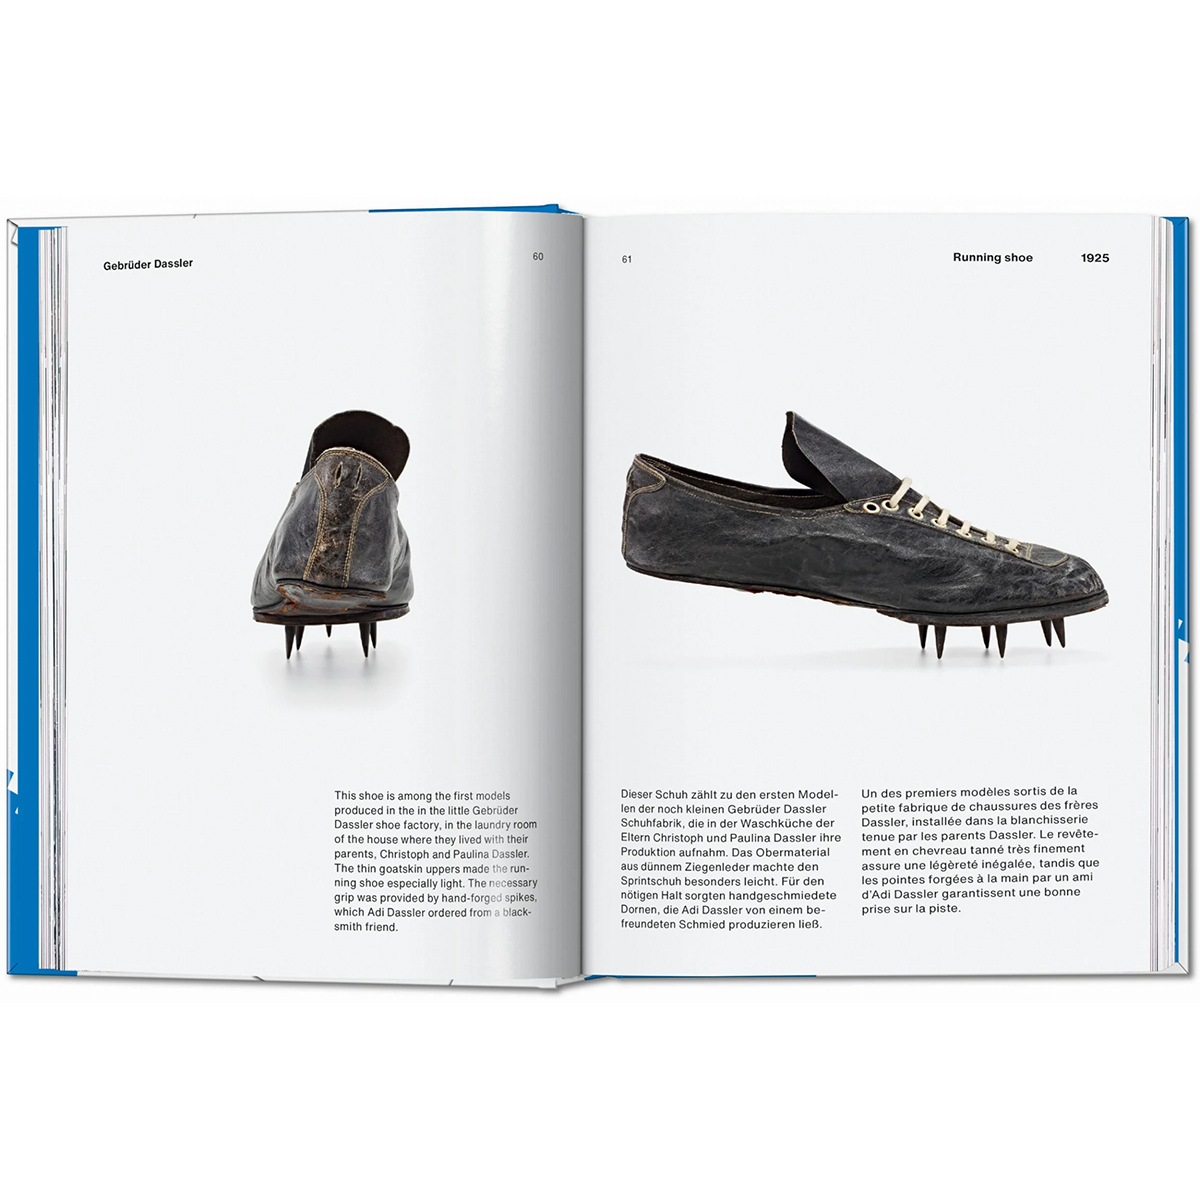 The adidas Archive - The Footwear Collection - 40th Ed.